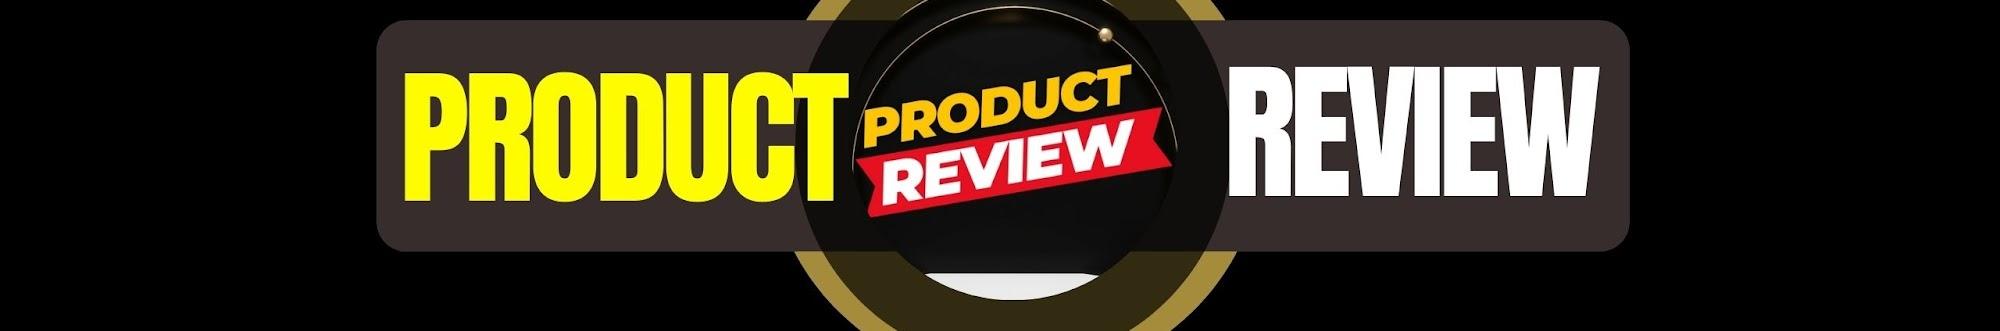 Product Review